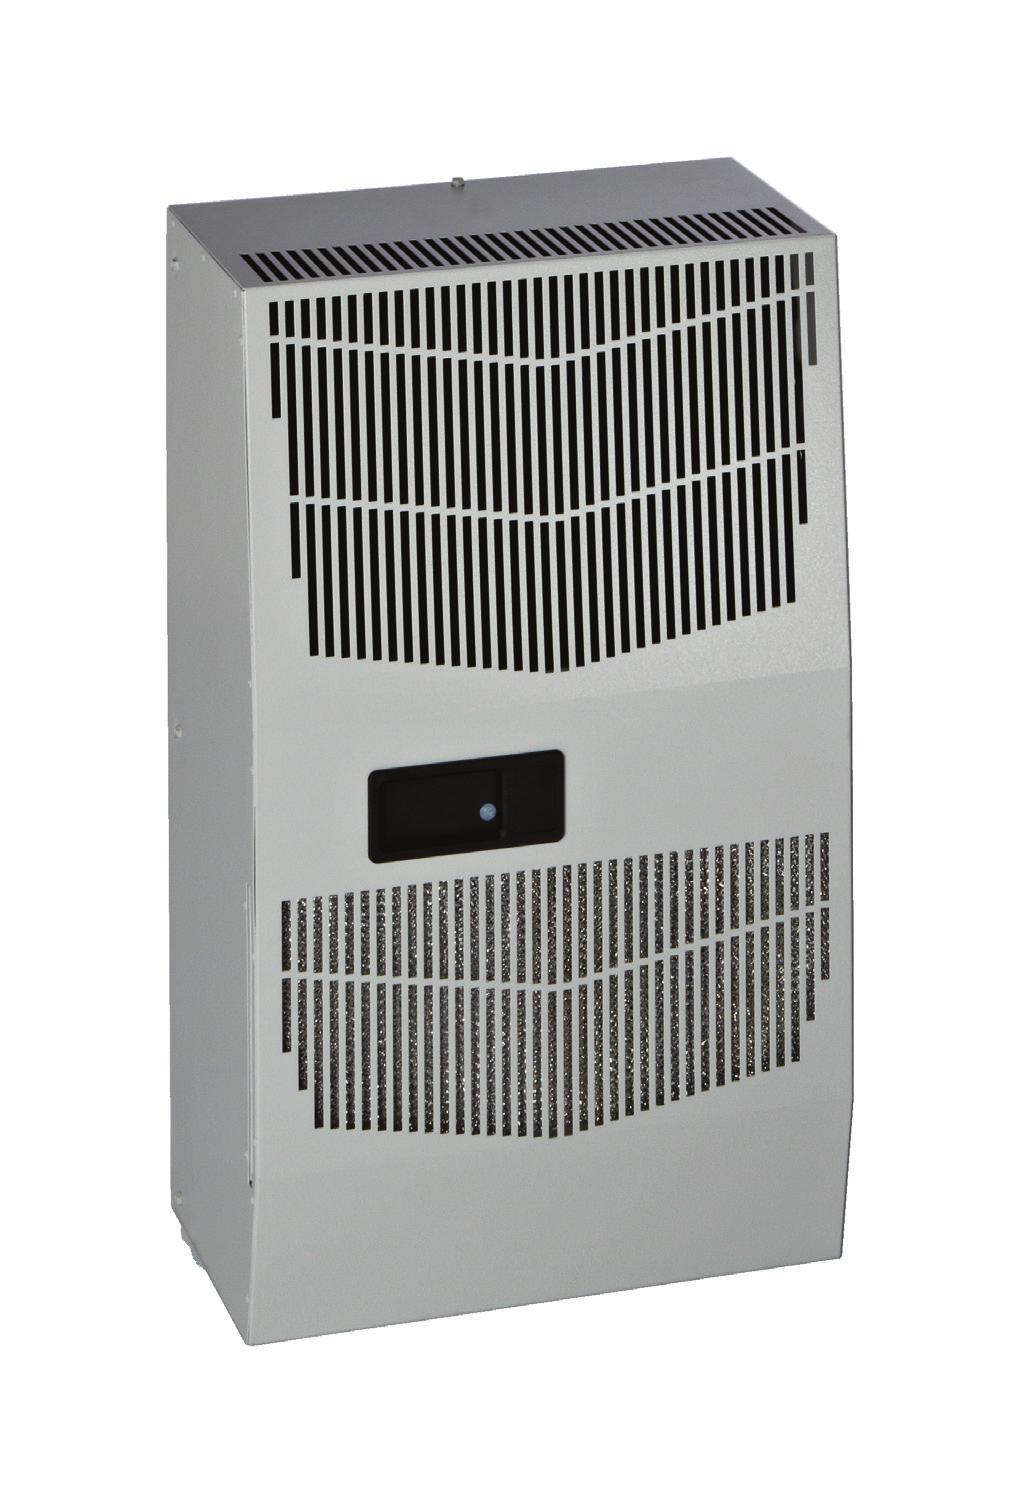 SPECTRACOOL Air Conditioner G28 Model